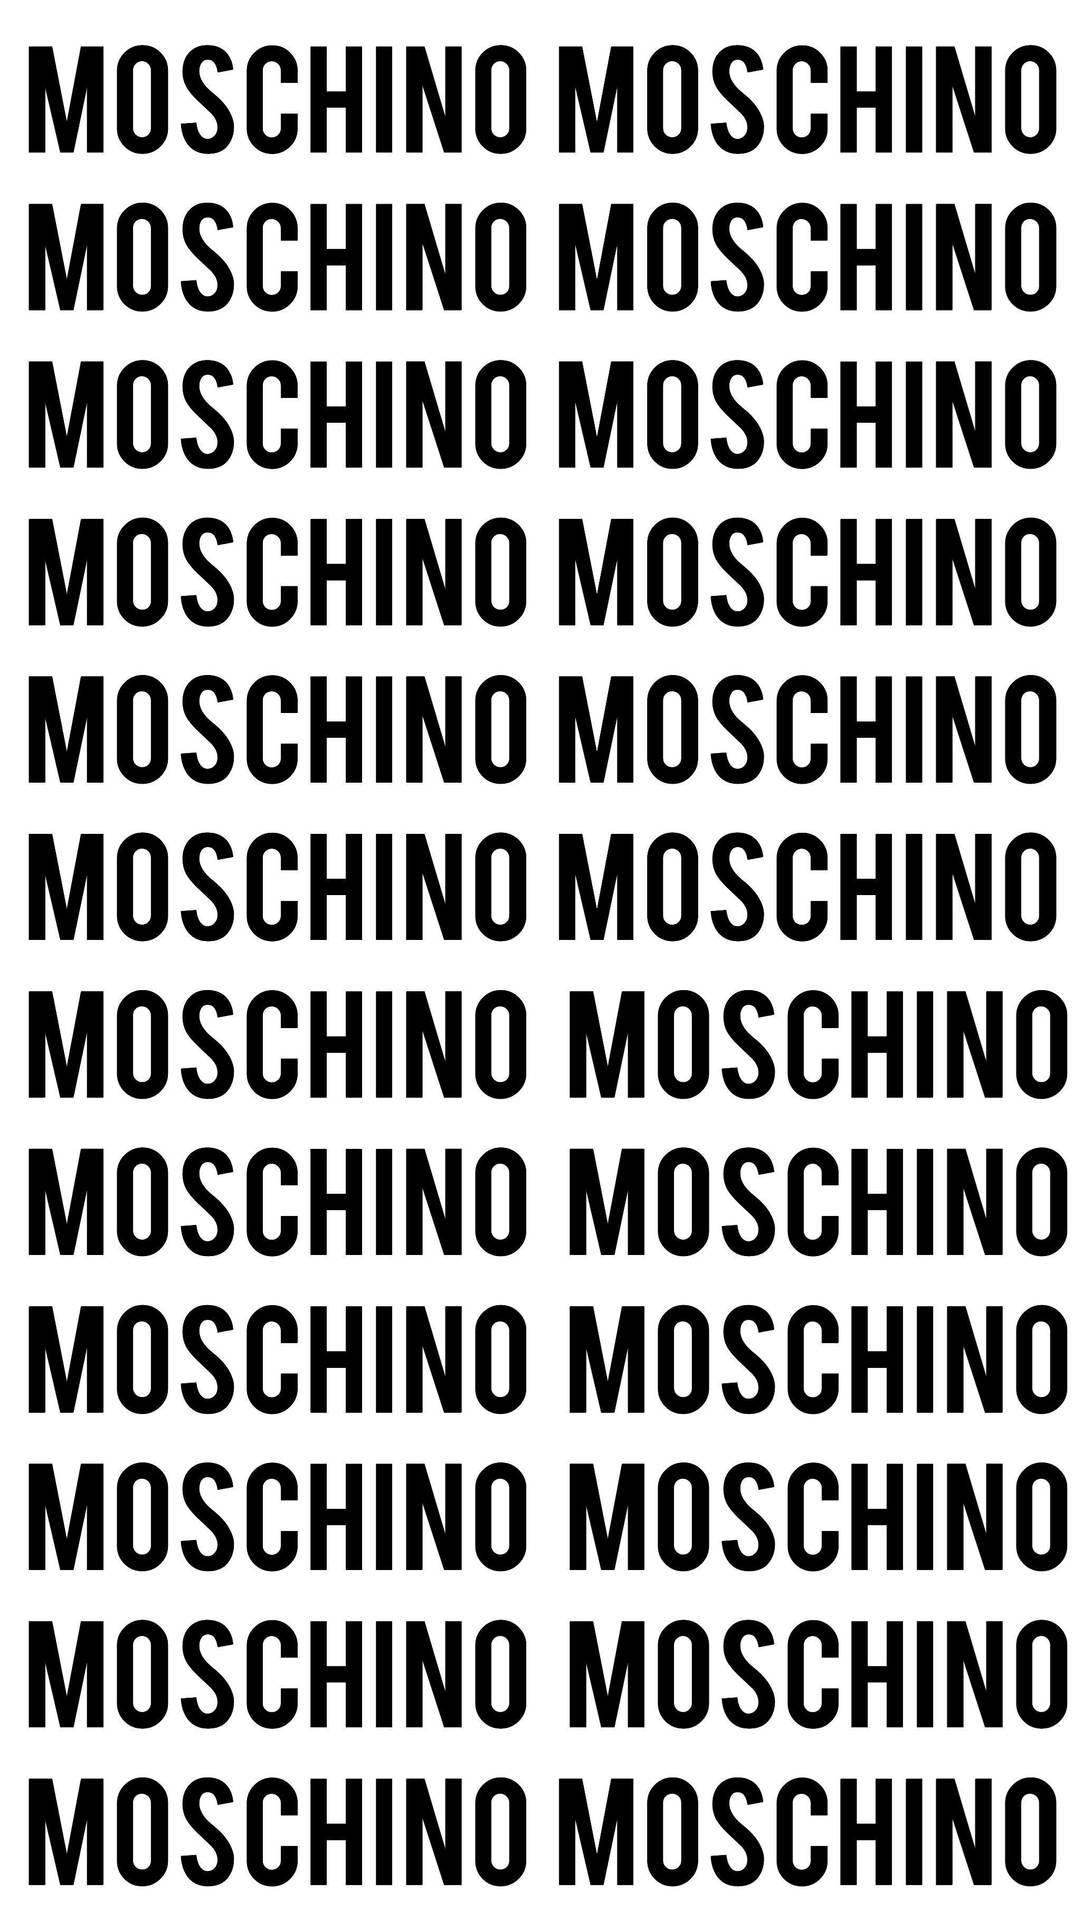 Caption: The Classic Black and White Moschino Logo Wallpaper